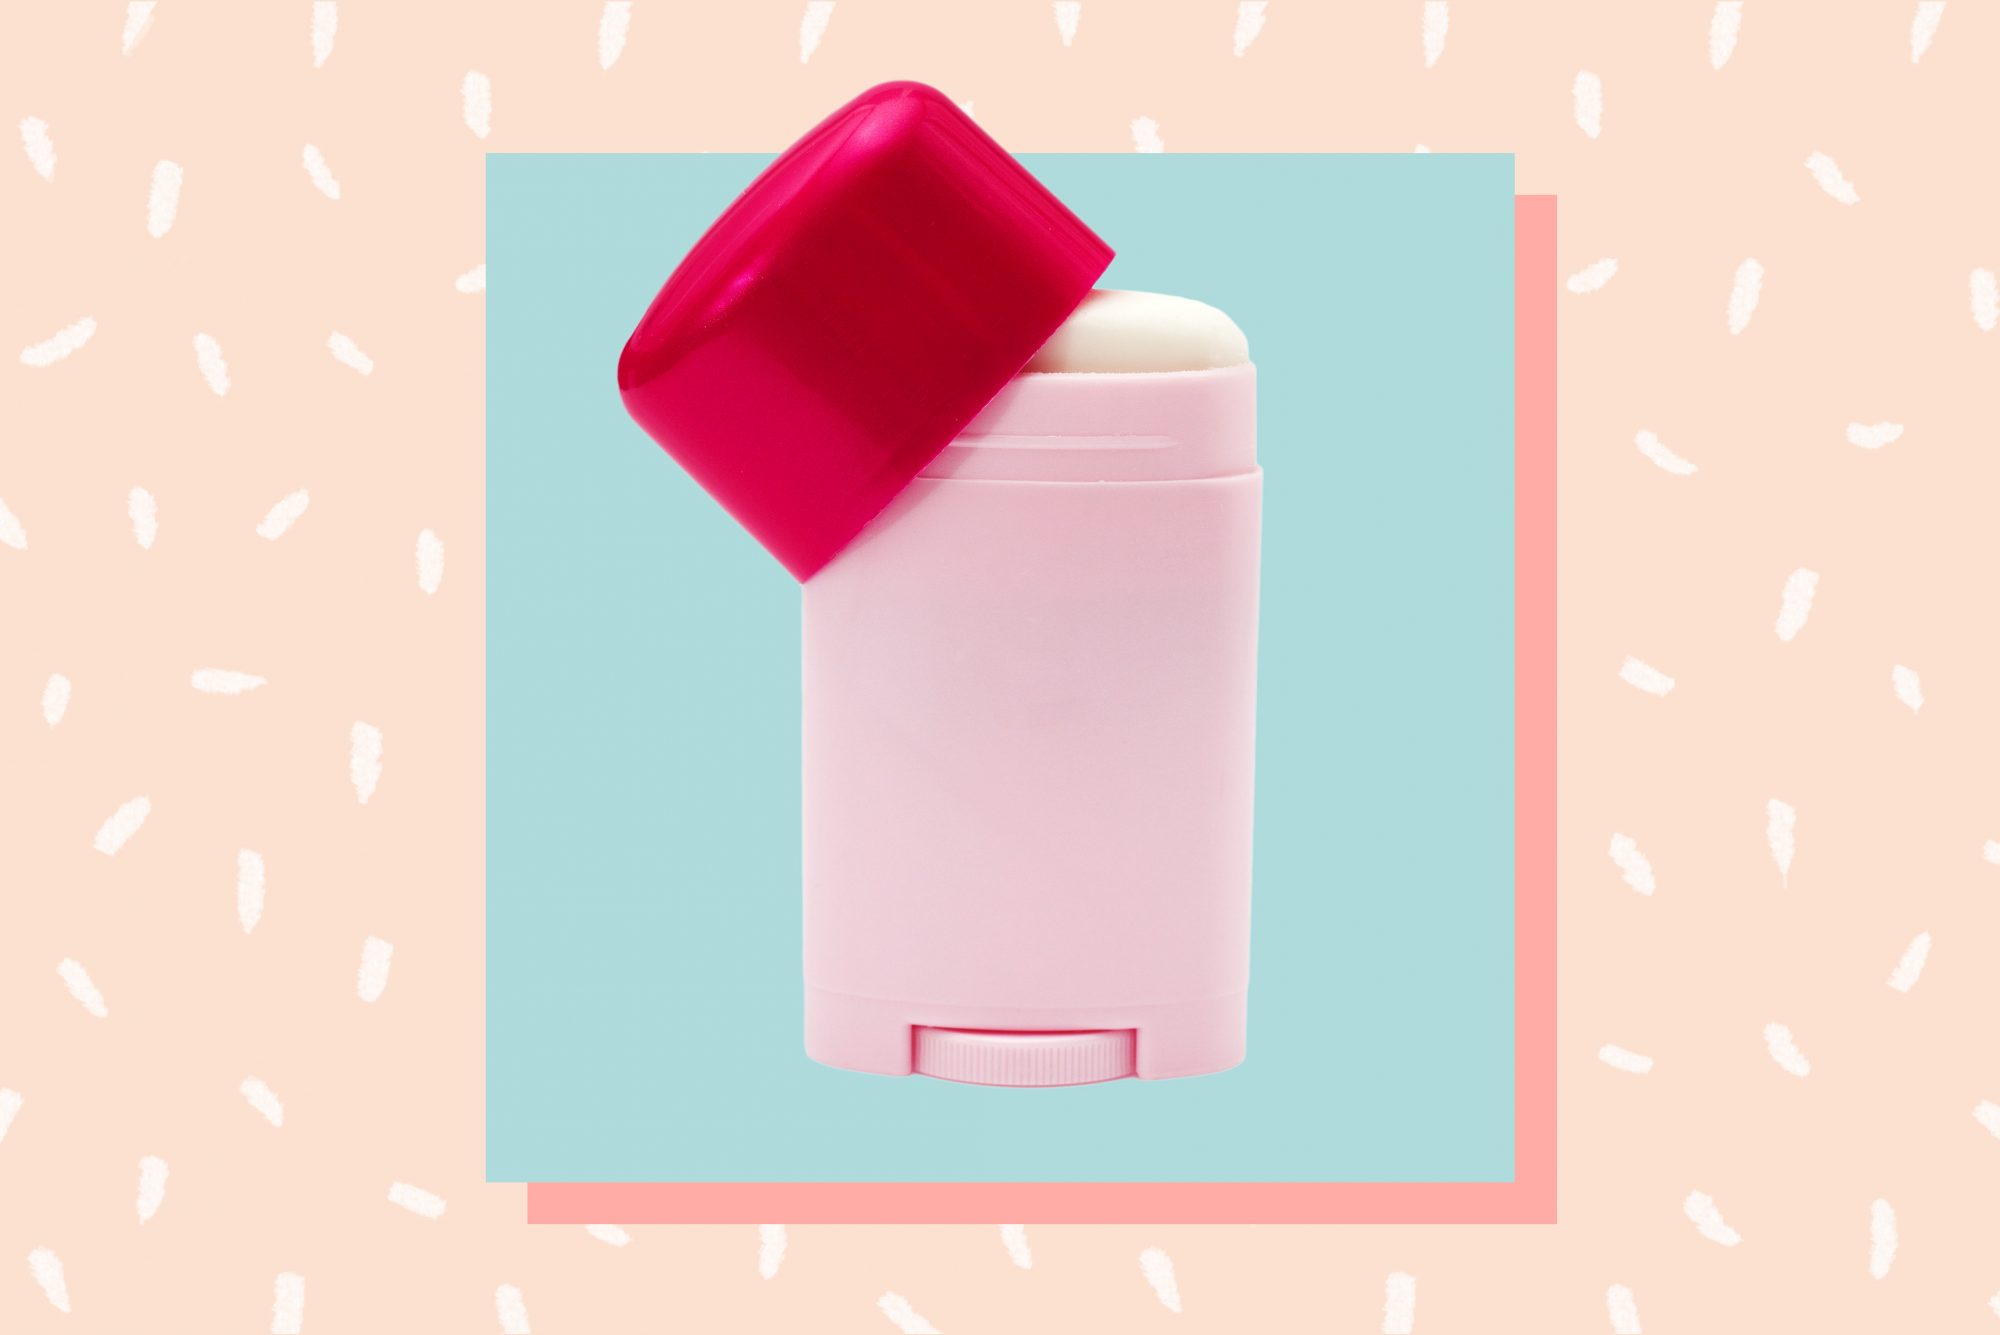 An image of a deodorant on a colorful background.